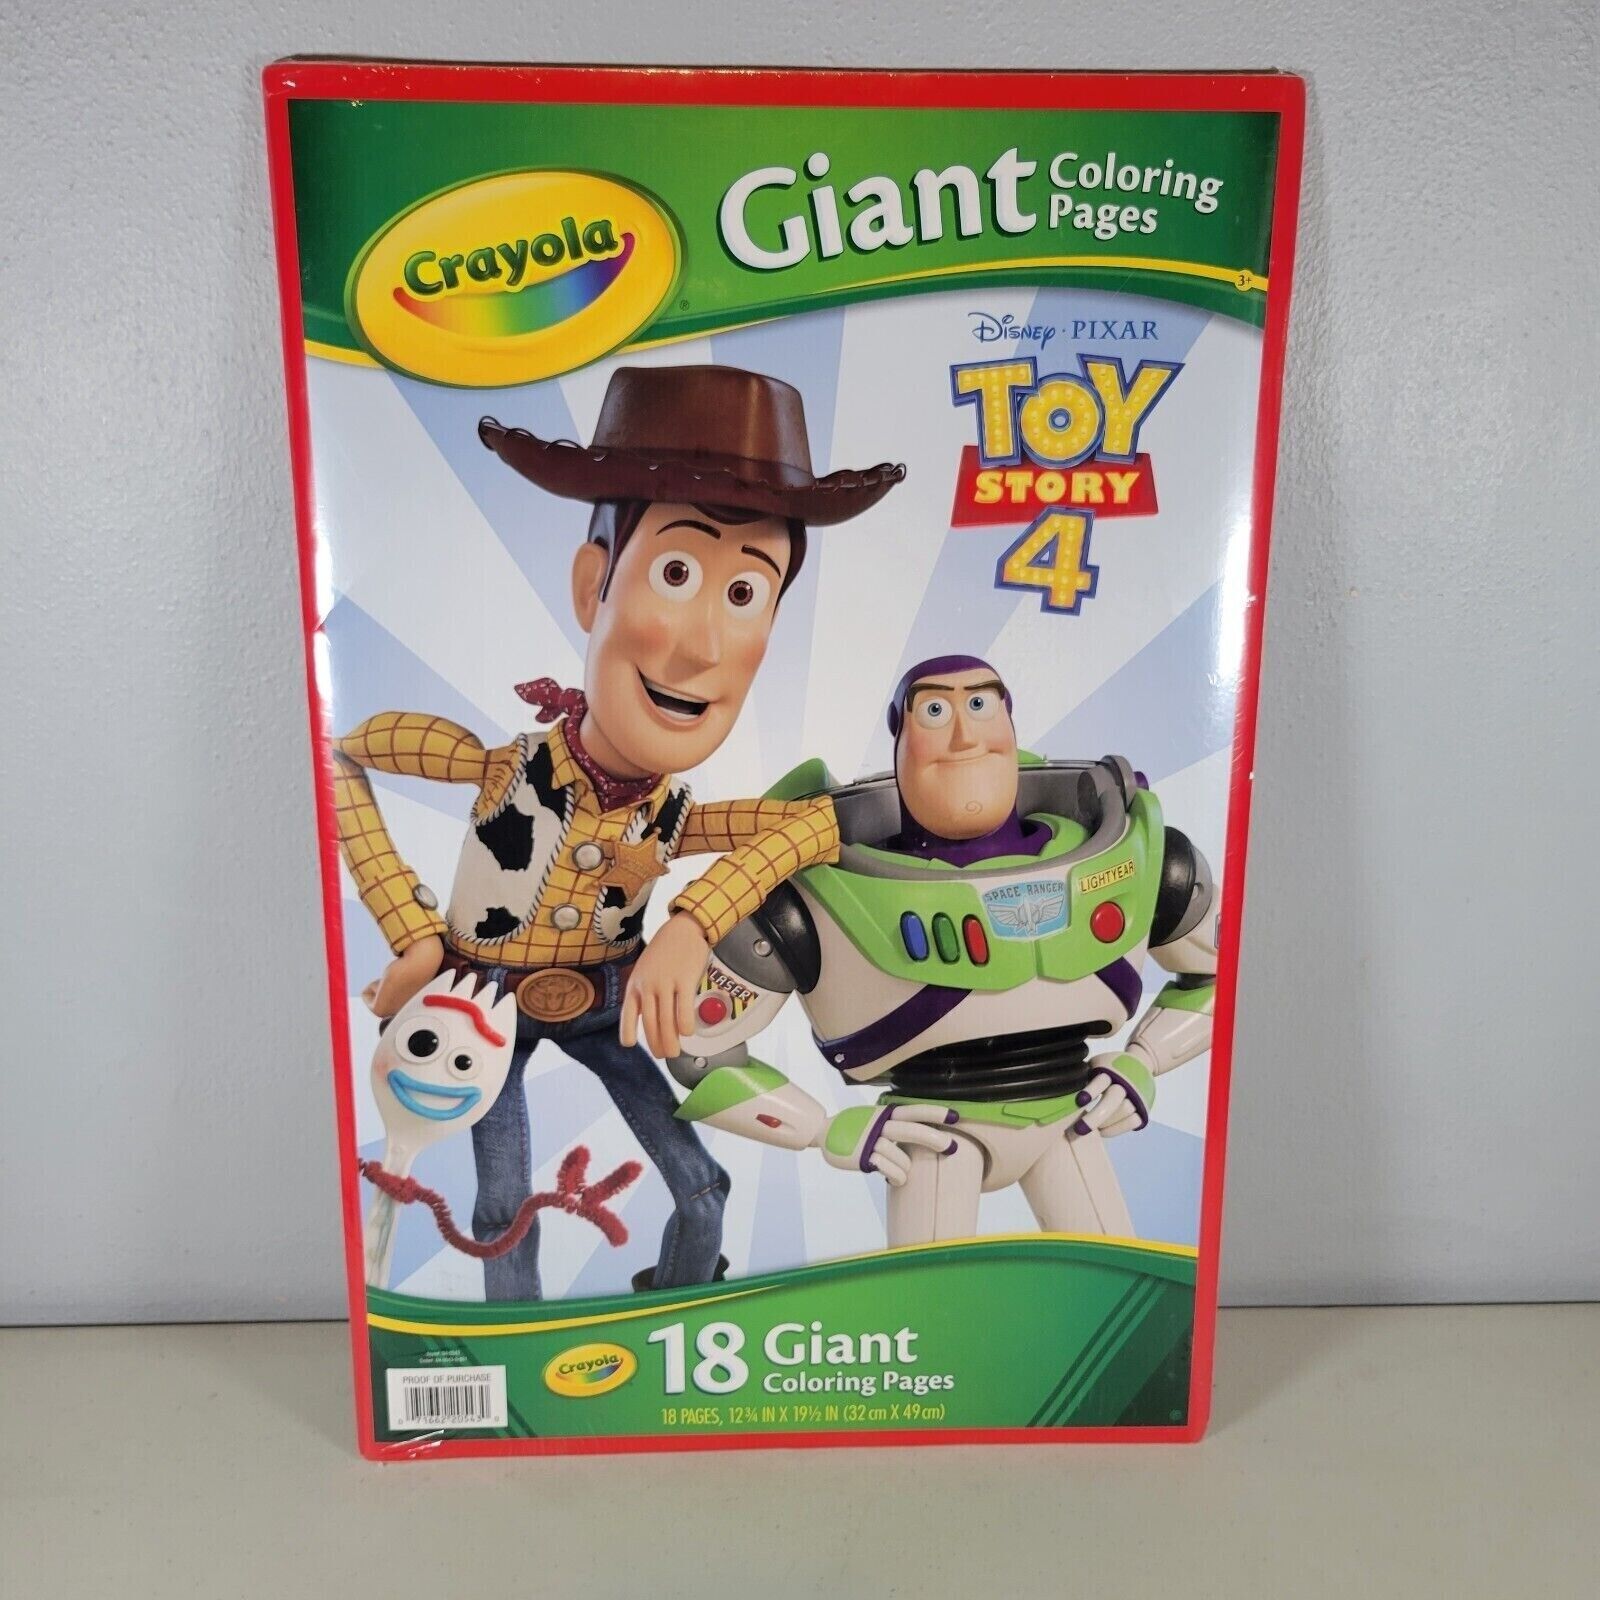 Toy Story 4 Disney Pixar Crayola 18 Giant Coloring Pages 12" X 19" Sealed New - $14.60